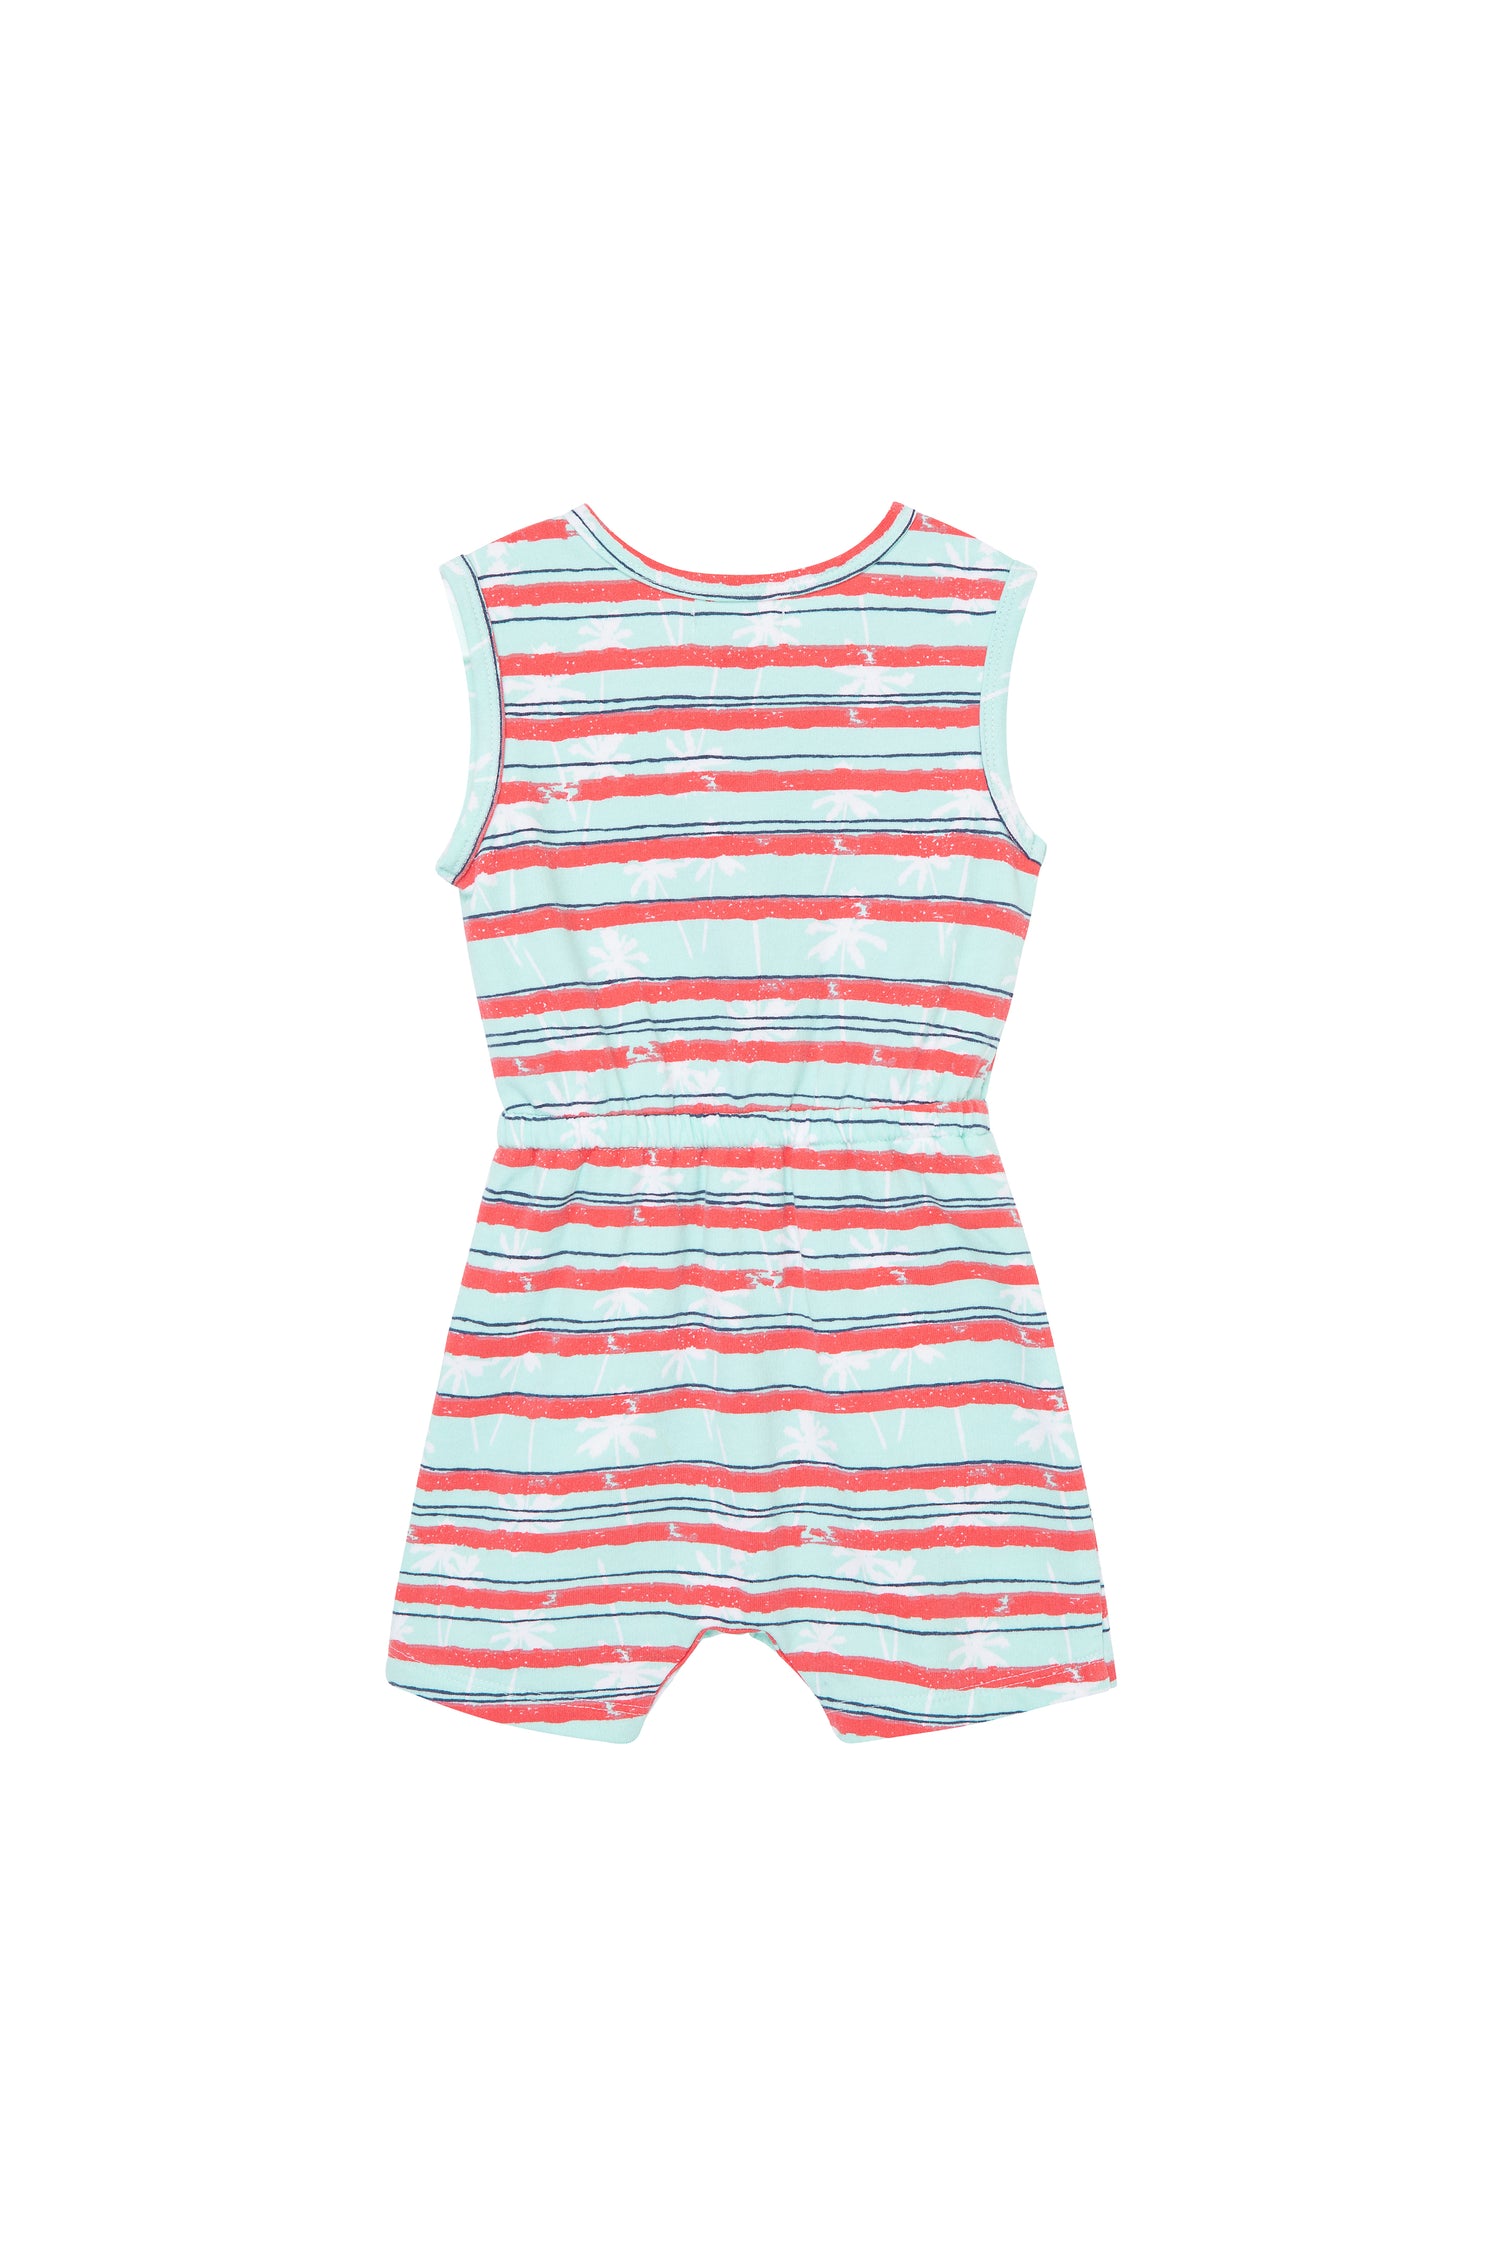 BACK OF BLUE AND RED STRIPED ROMPER WITH WHITE PALM TREES